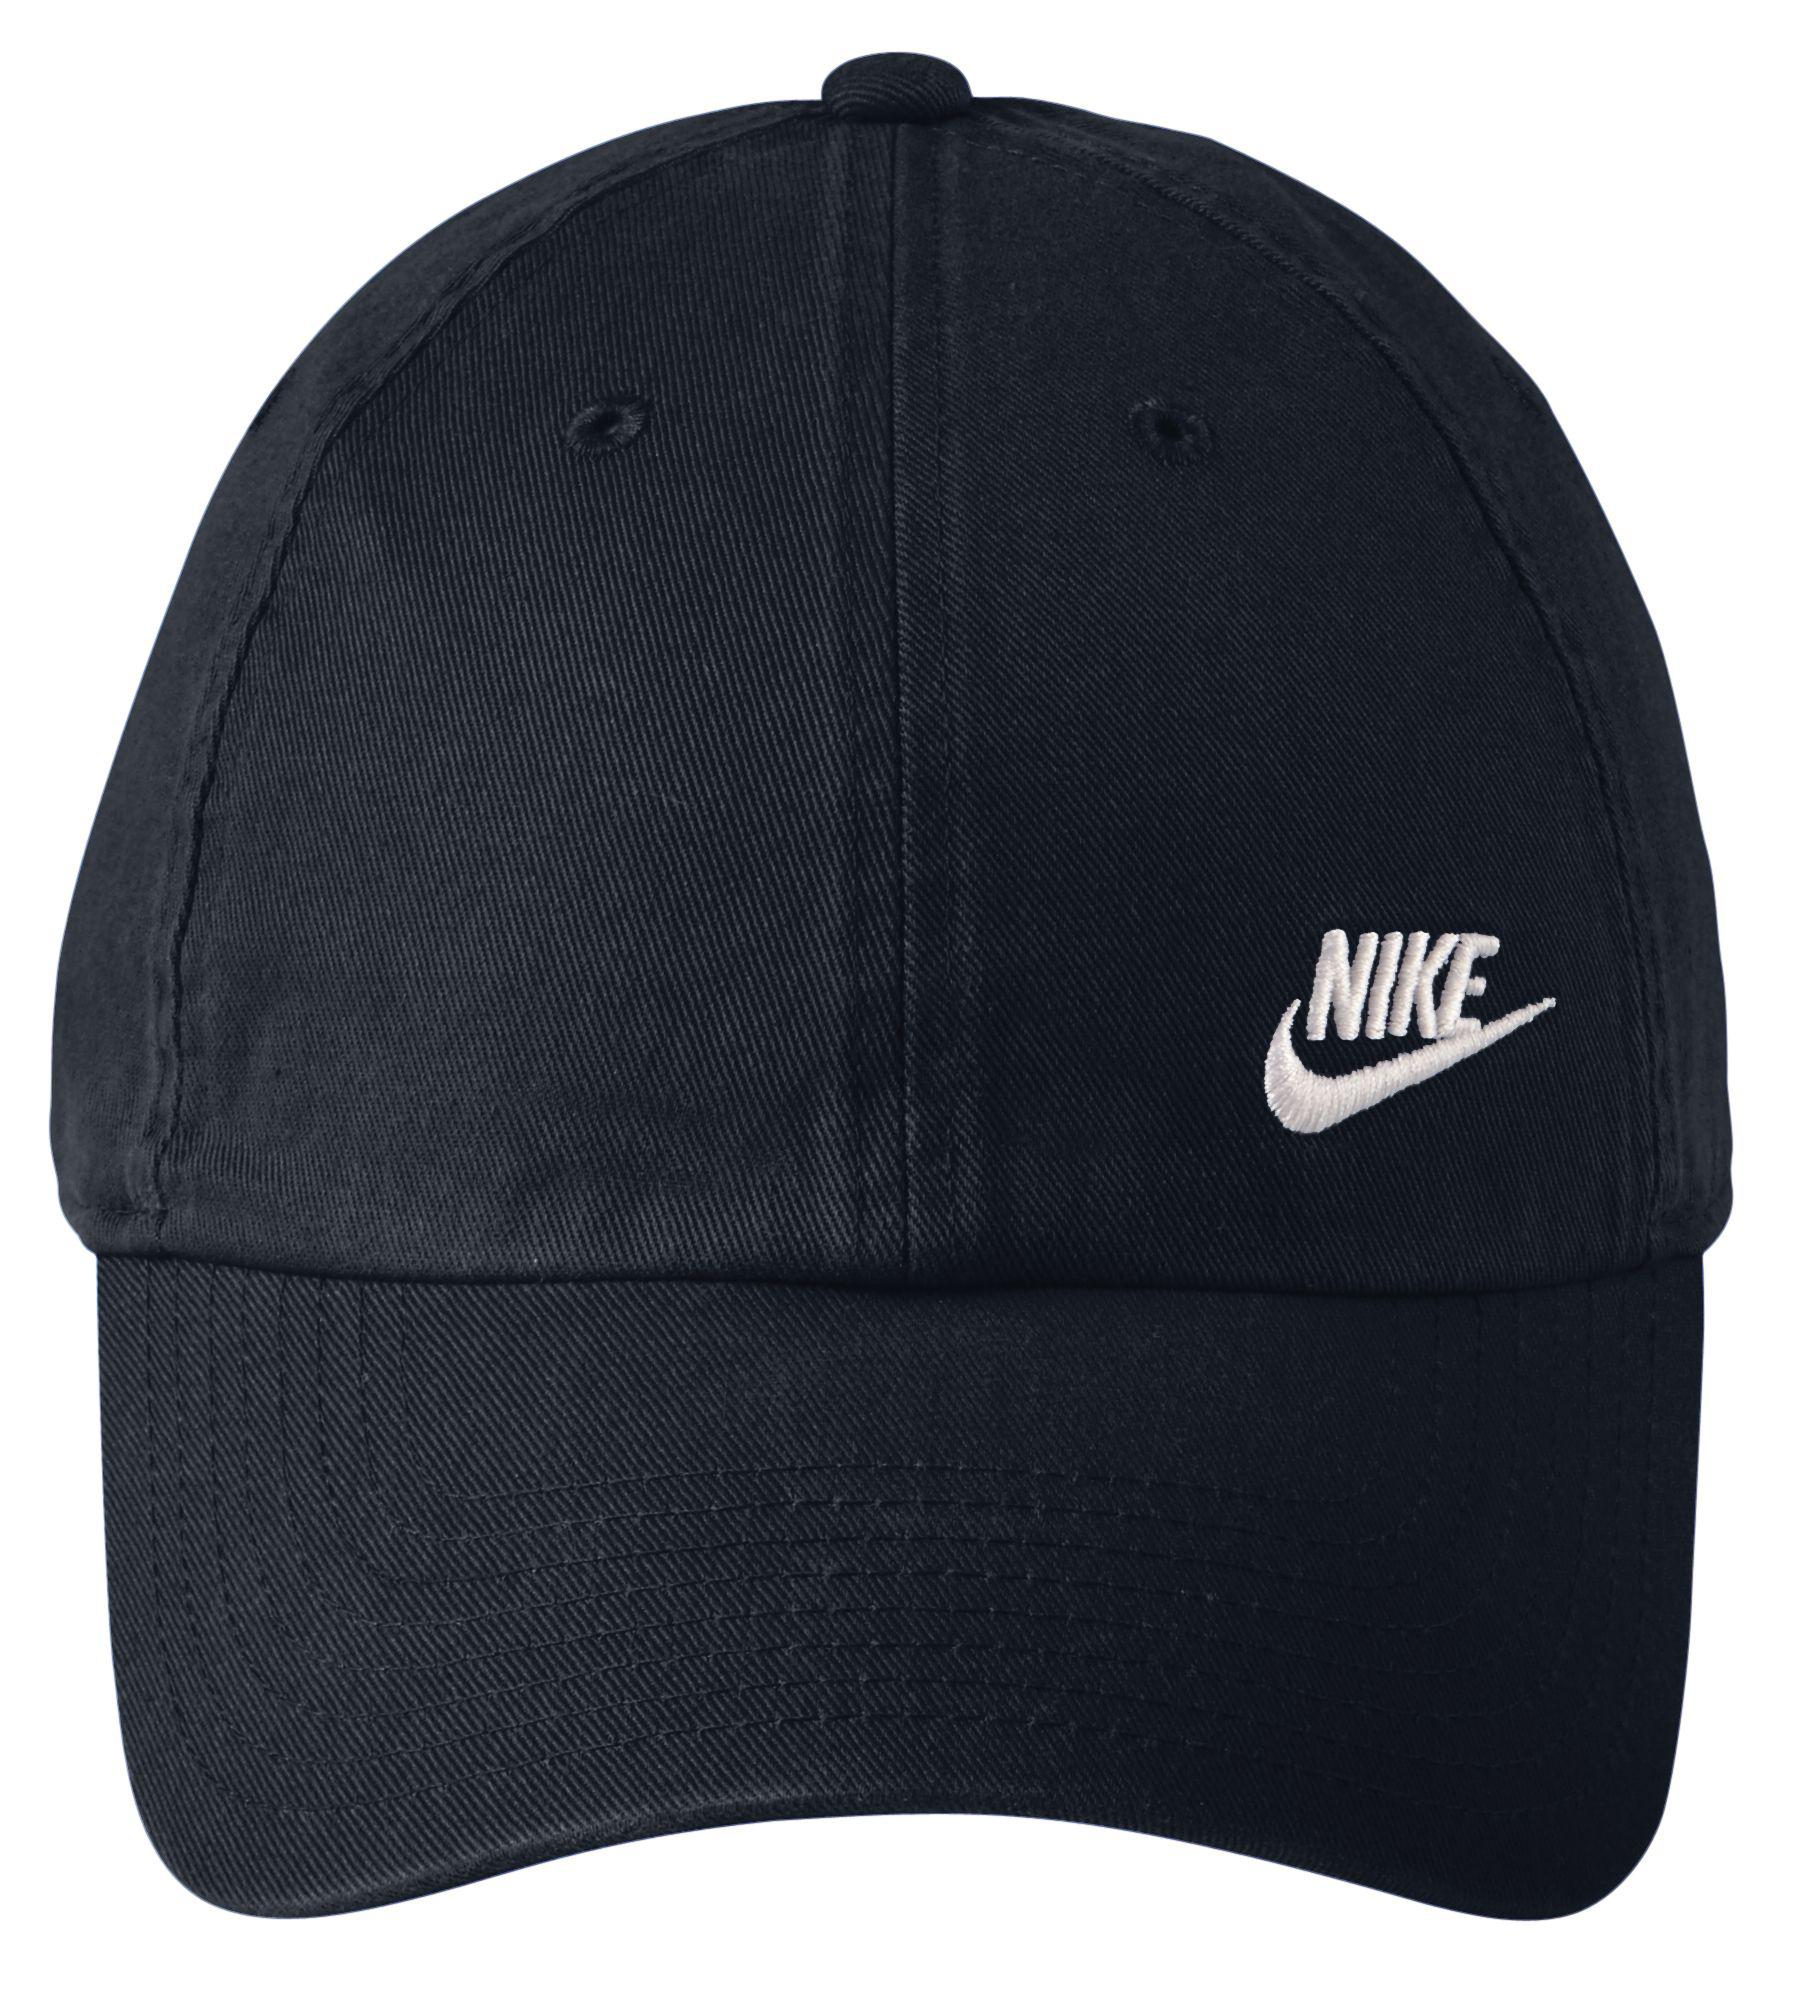 Nike Cotton Twill H86 Adjustable Hat in Black - Lyst